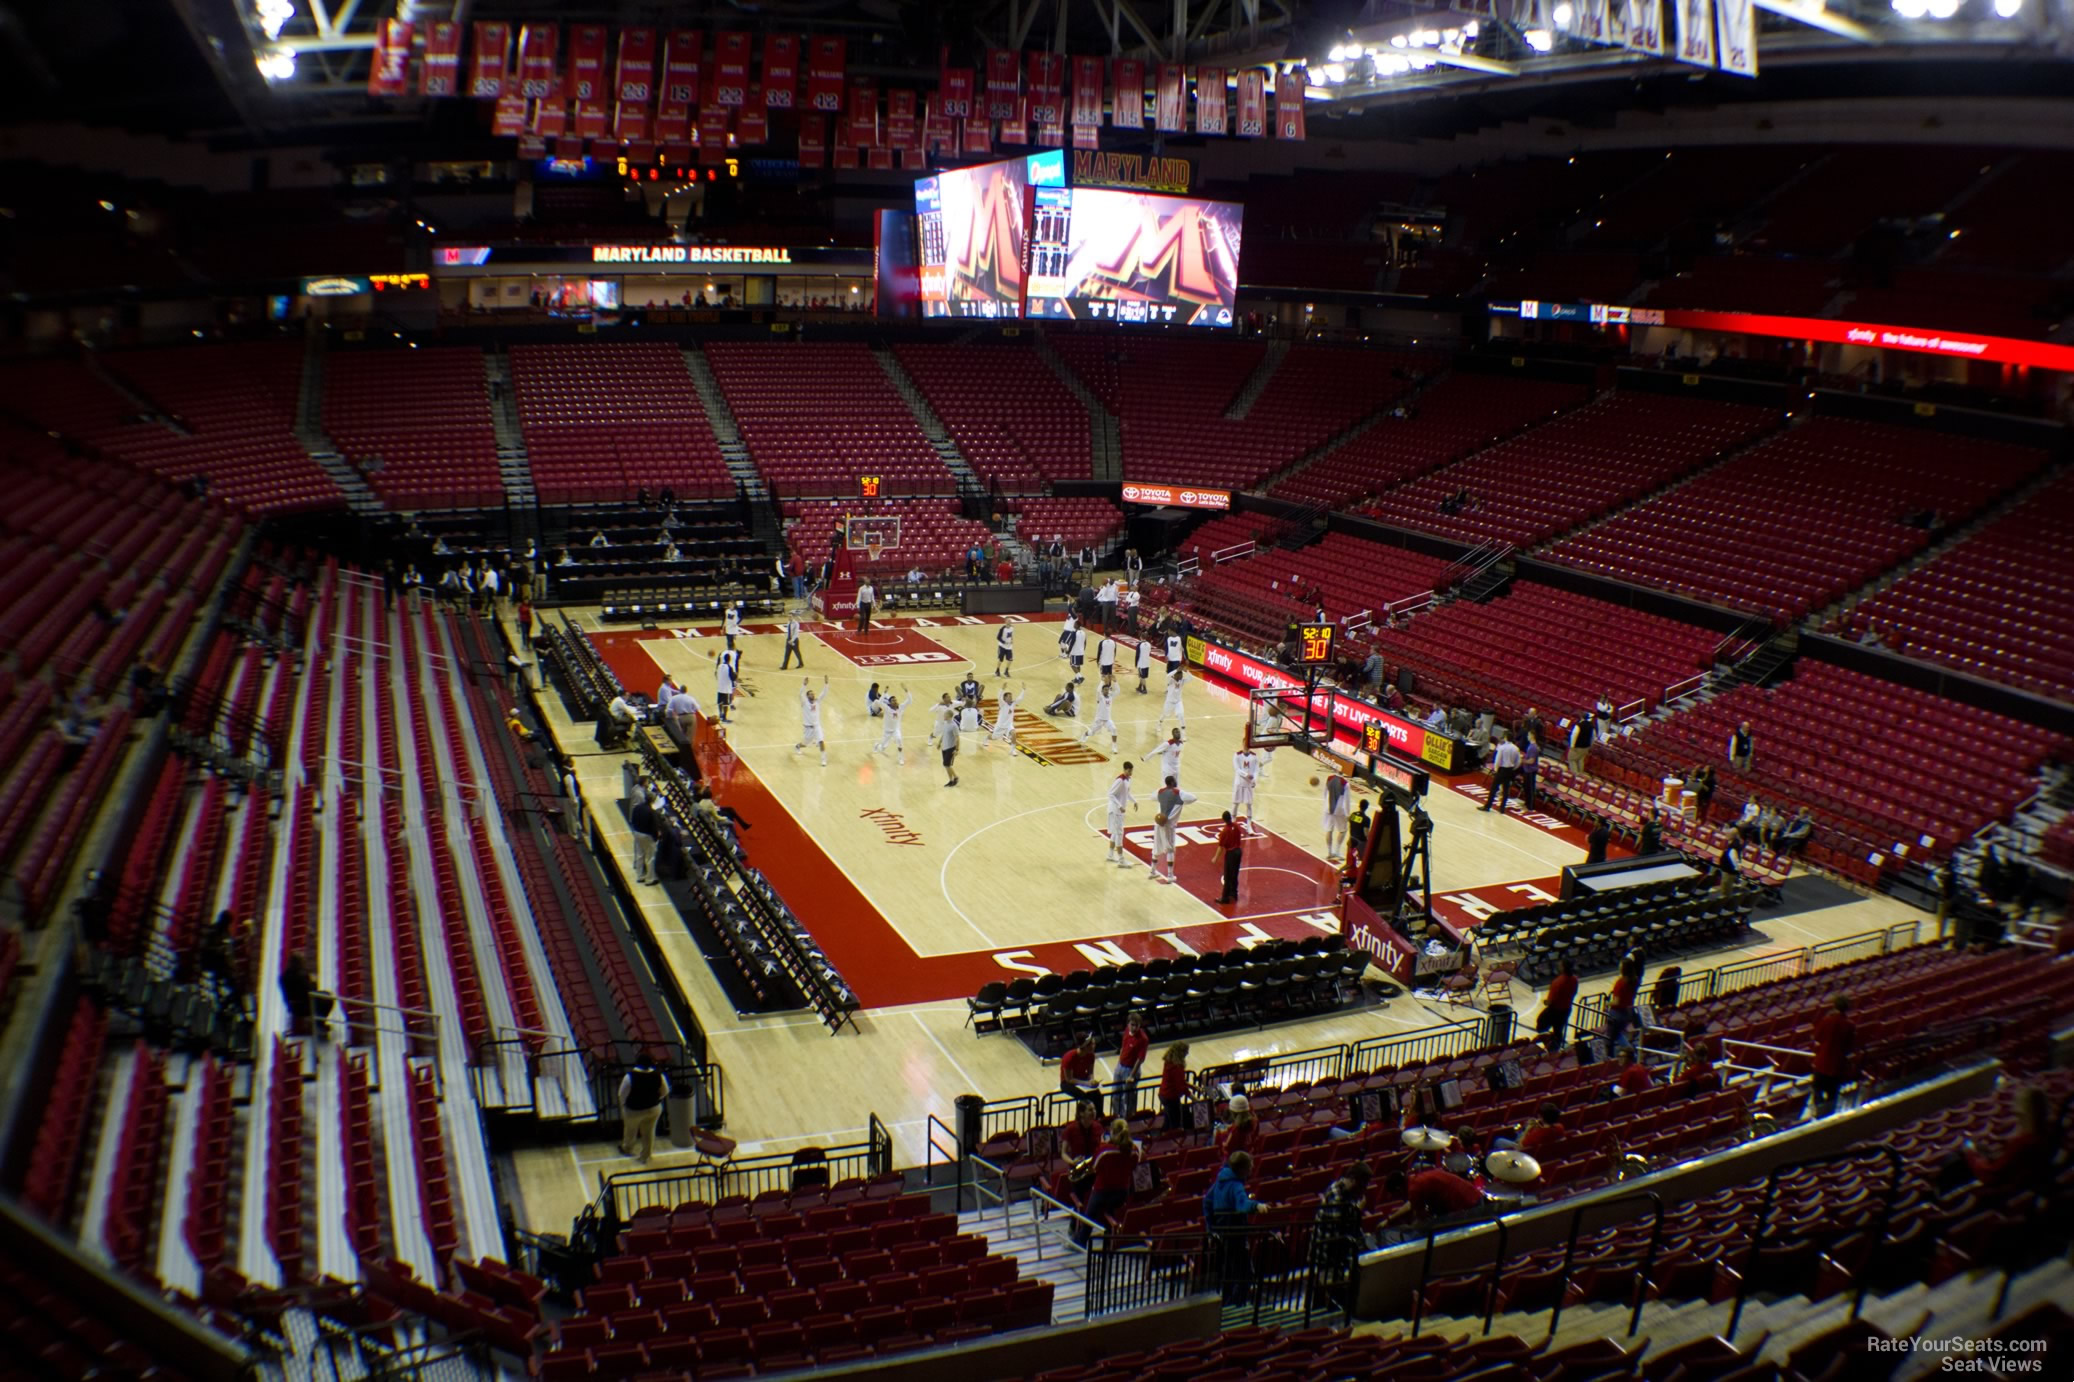 section 119, row 12 seat view  - xfinity center (maryland)